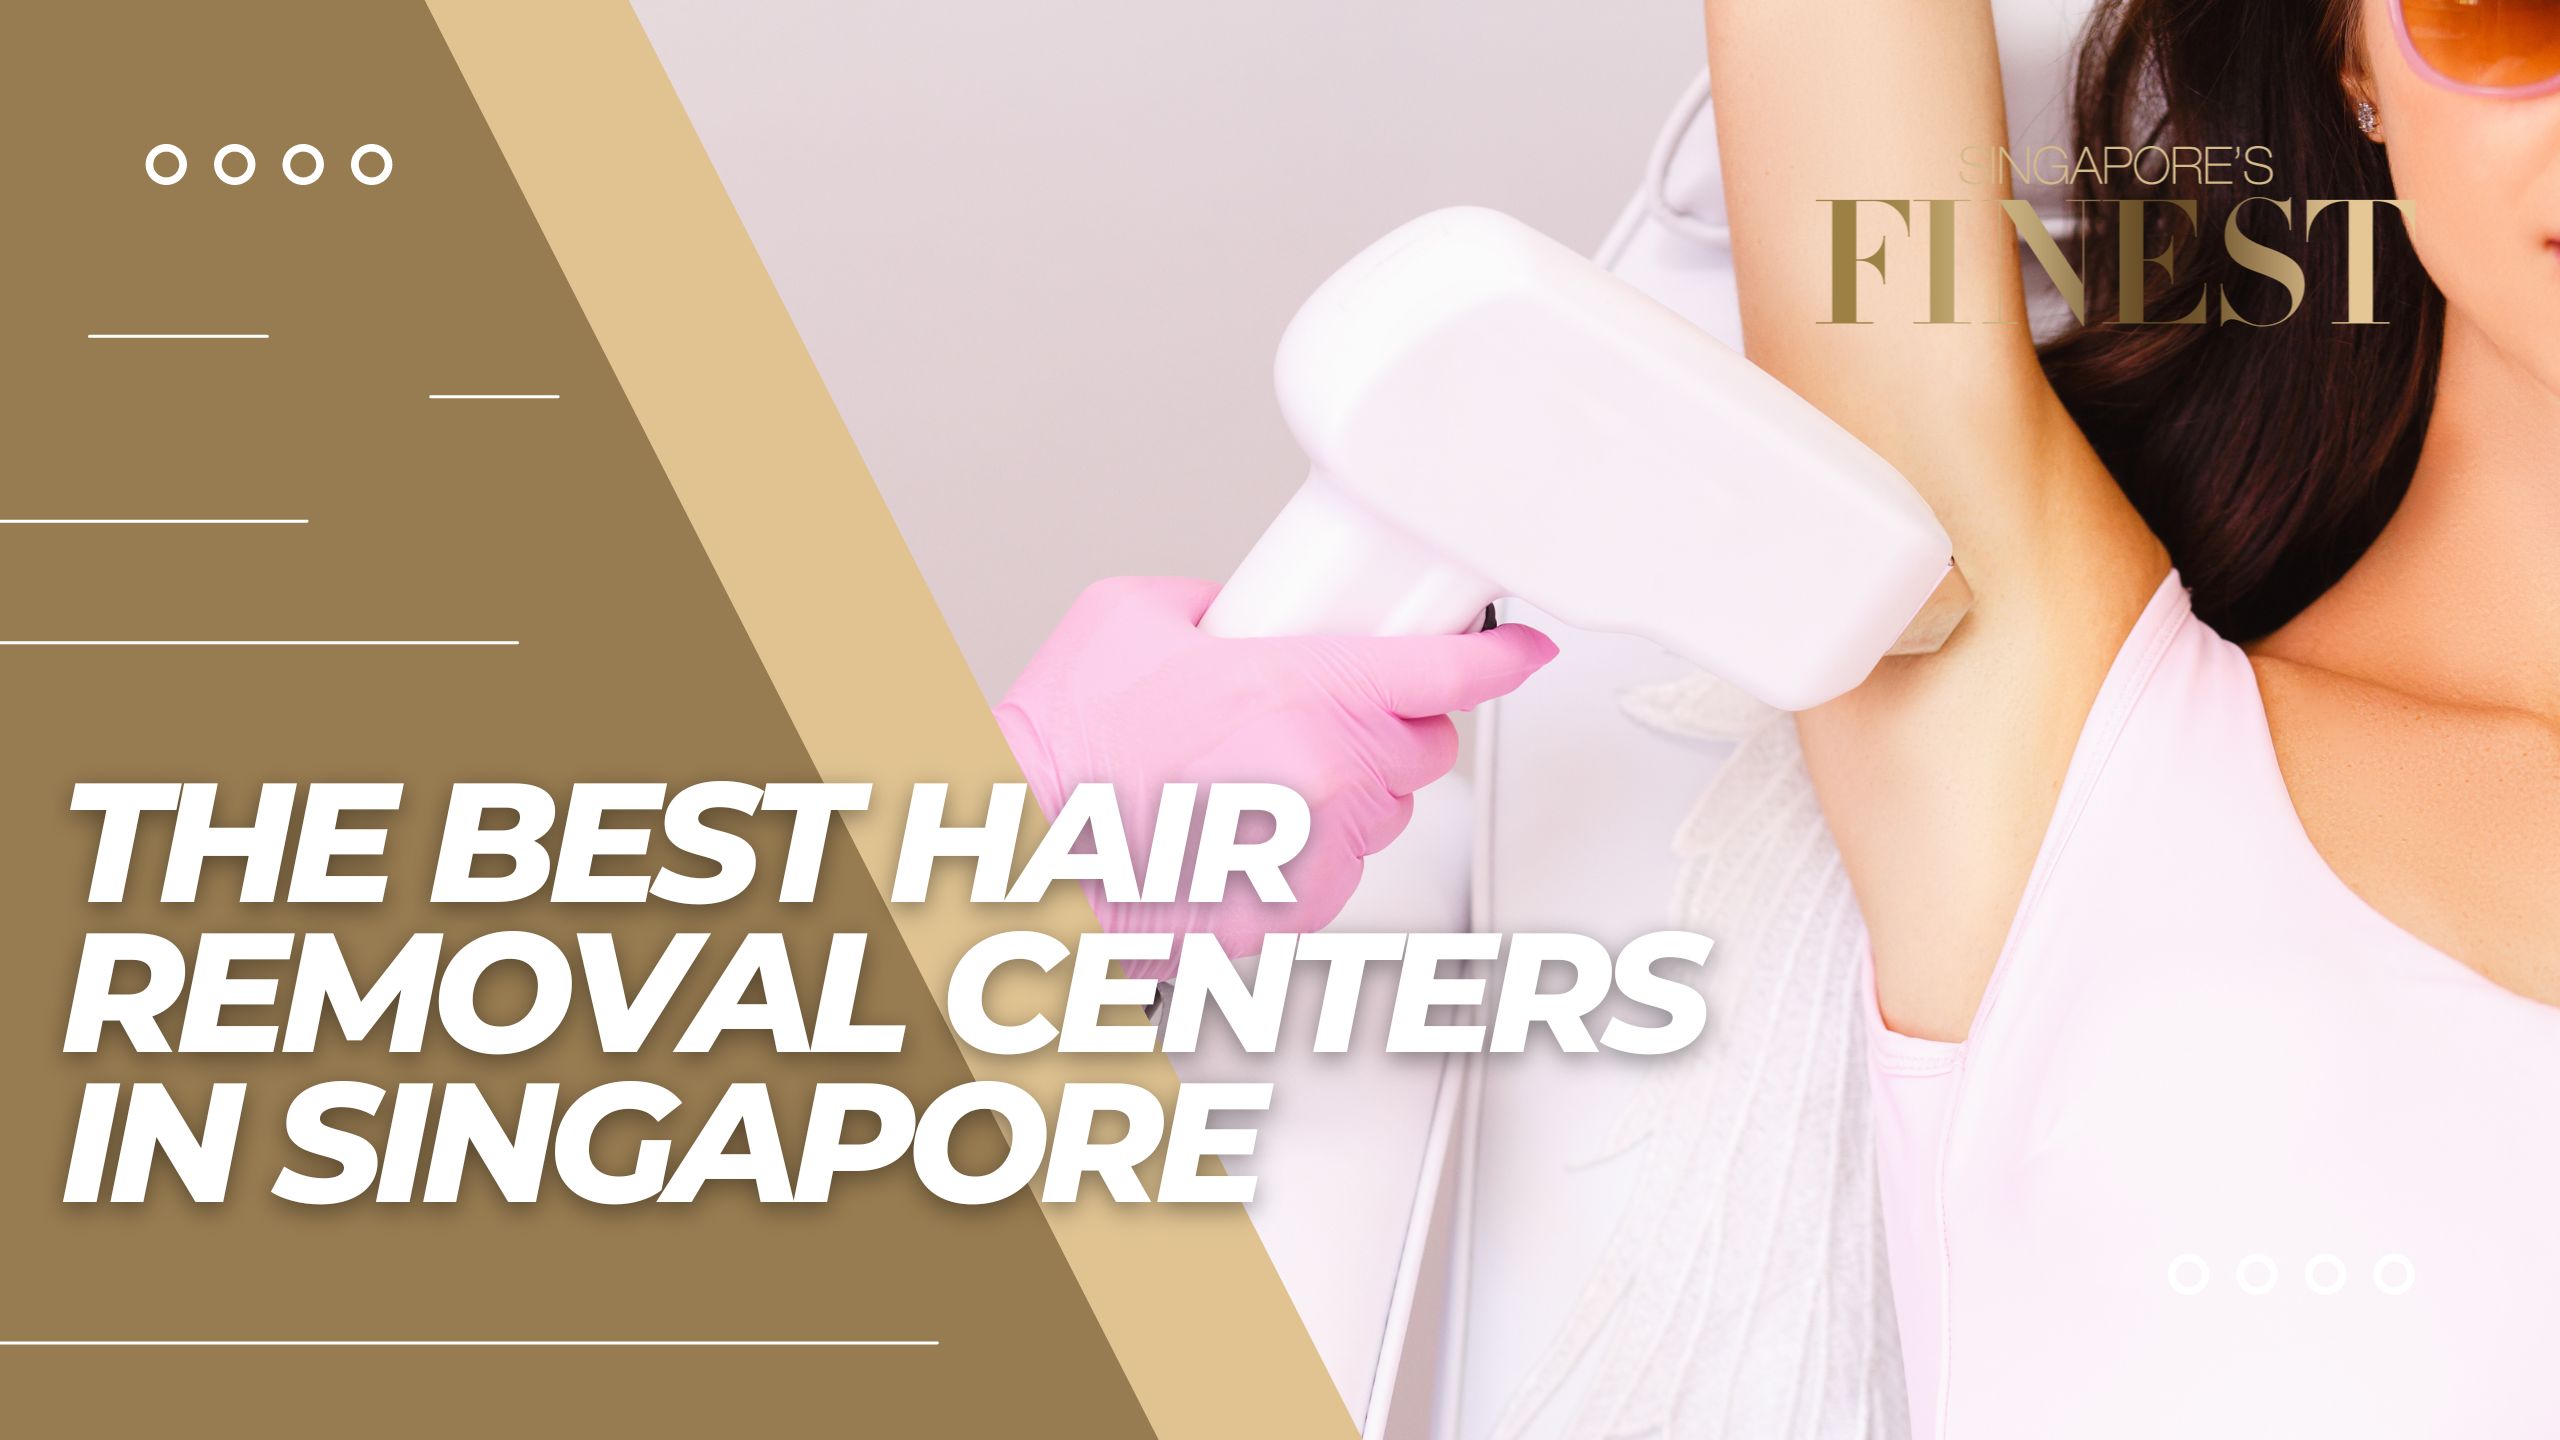 The Finest Hair Removal Centers in Singapore